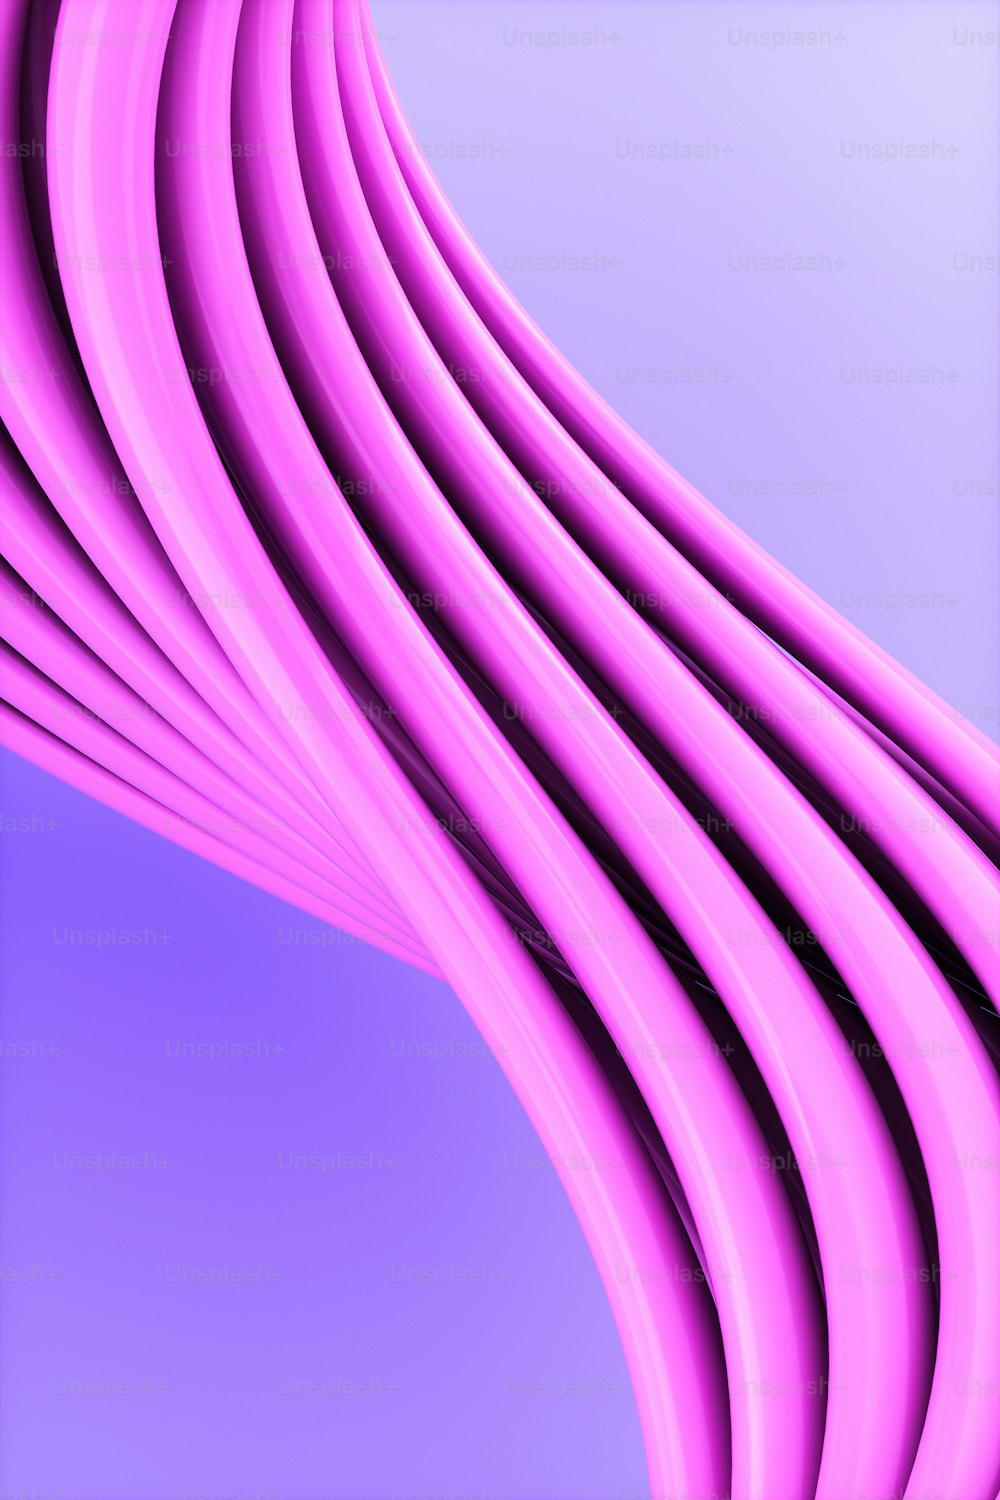 a purple and blue background with wavy lines